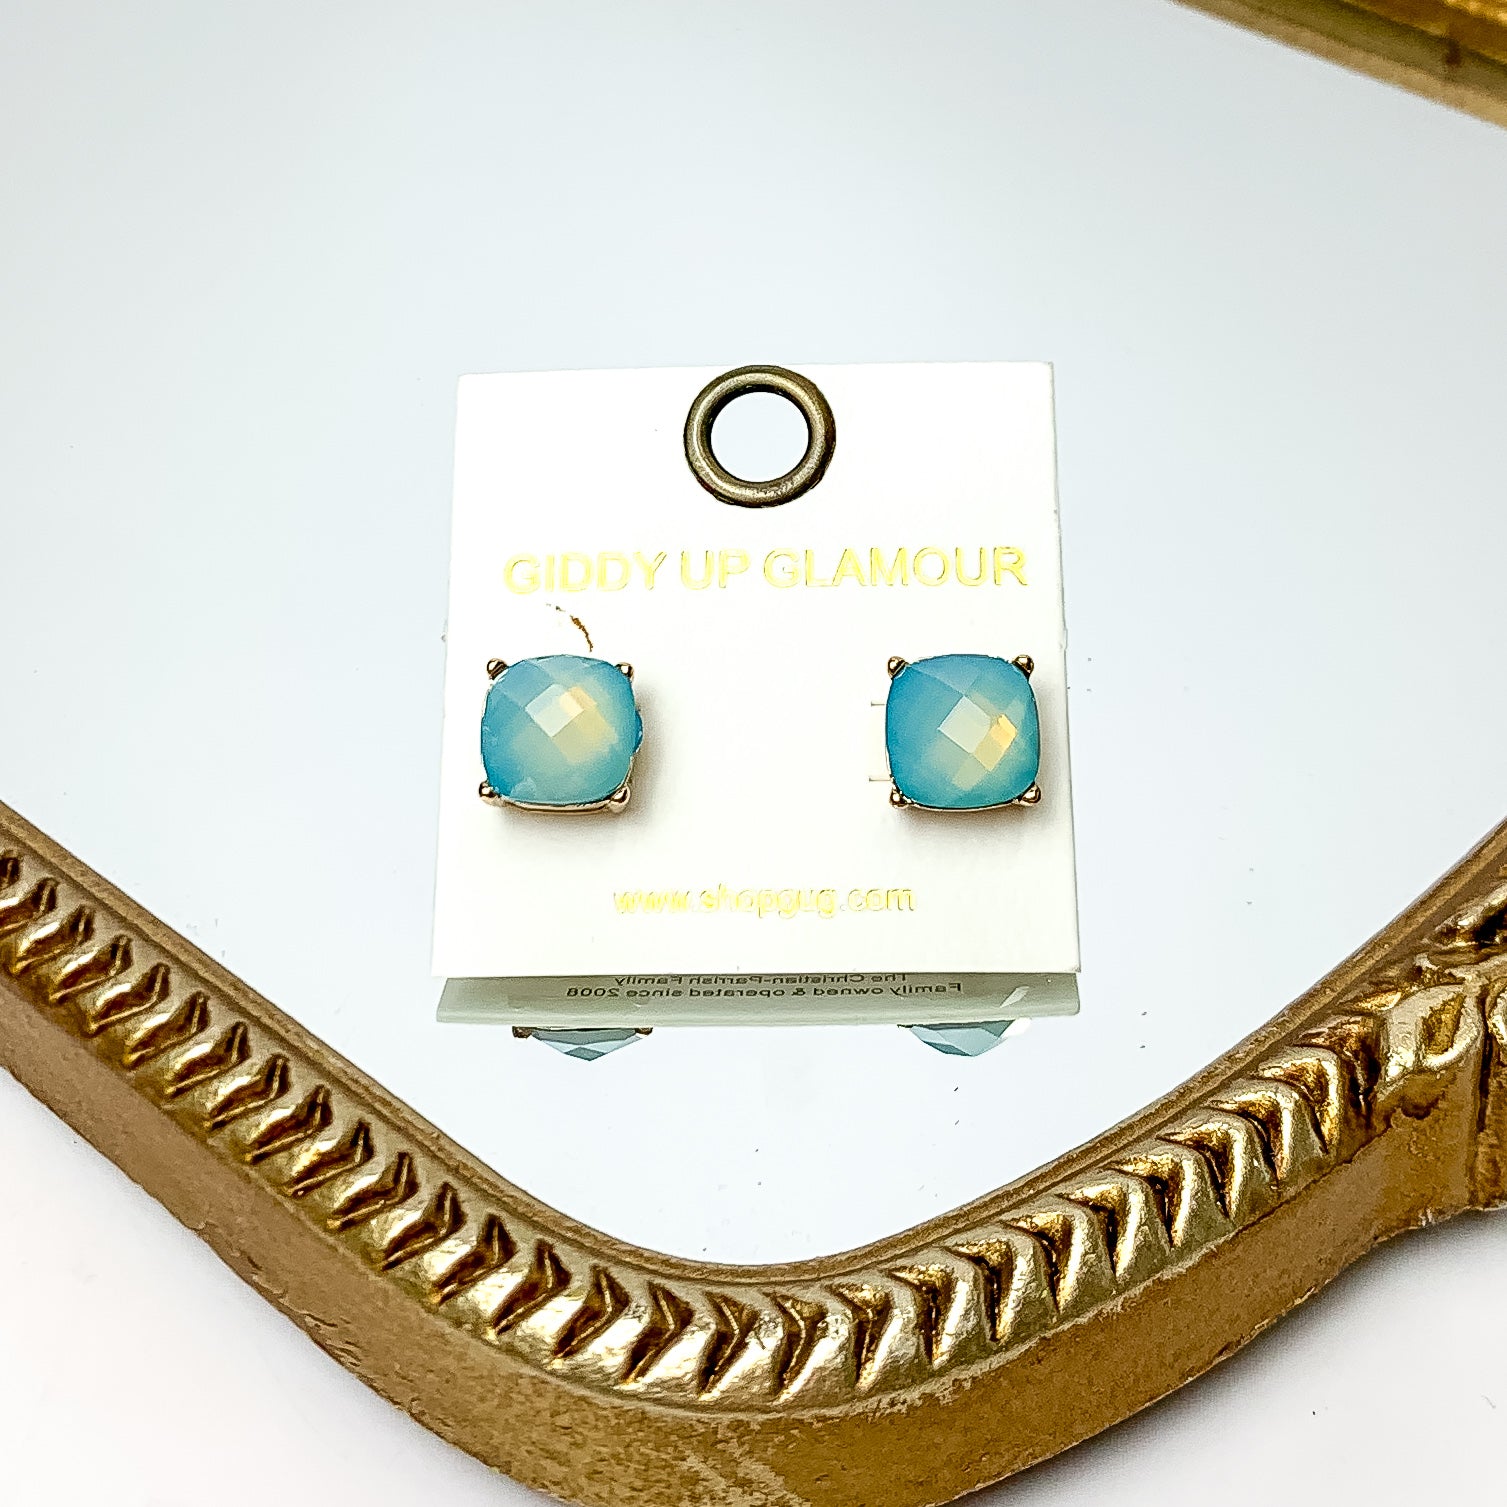 Large Crystal Stud Earrings in Light Blue. These earrings are pictured laying on a gold trimmed mirror.